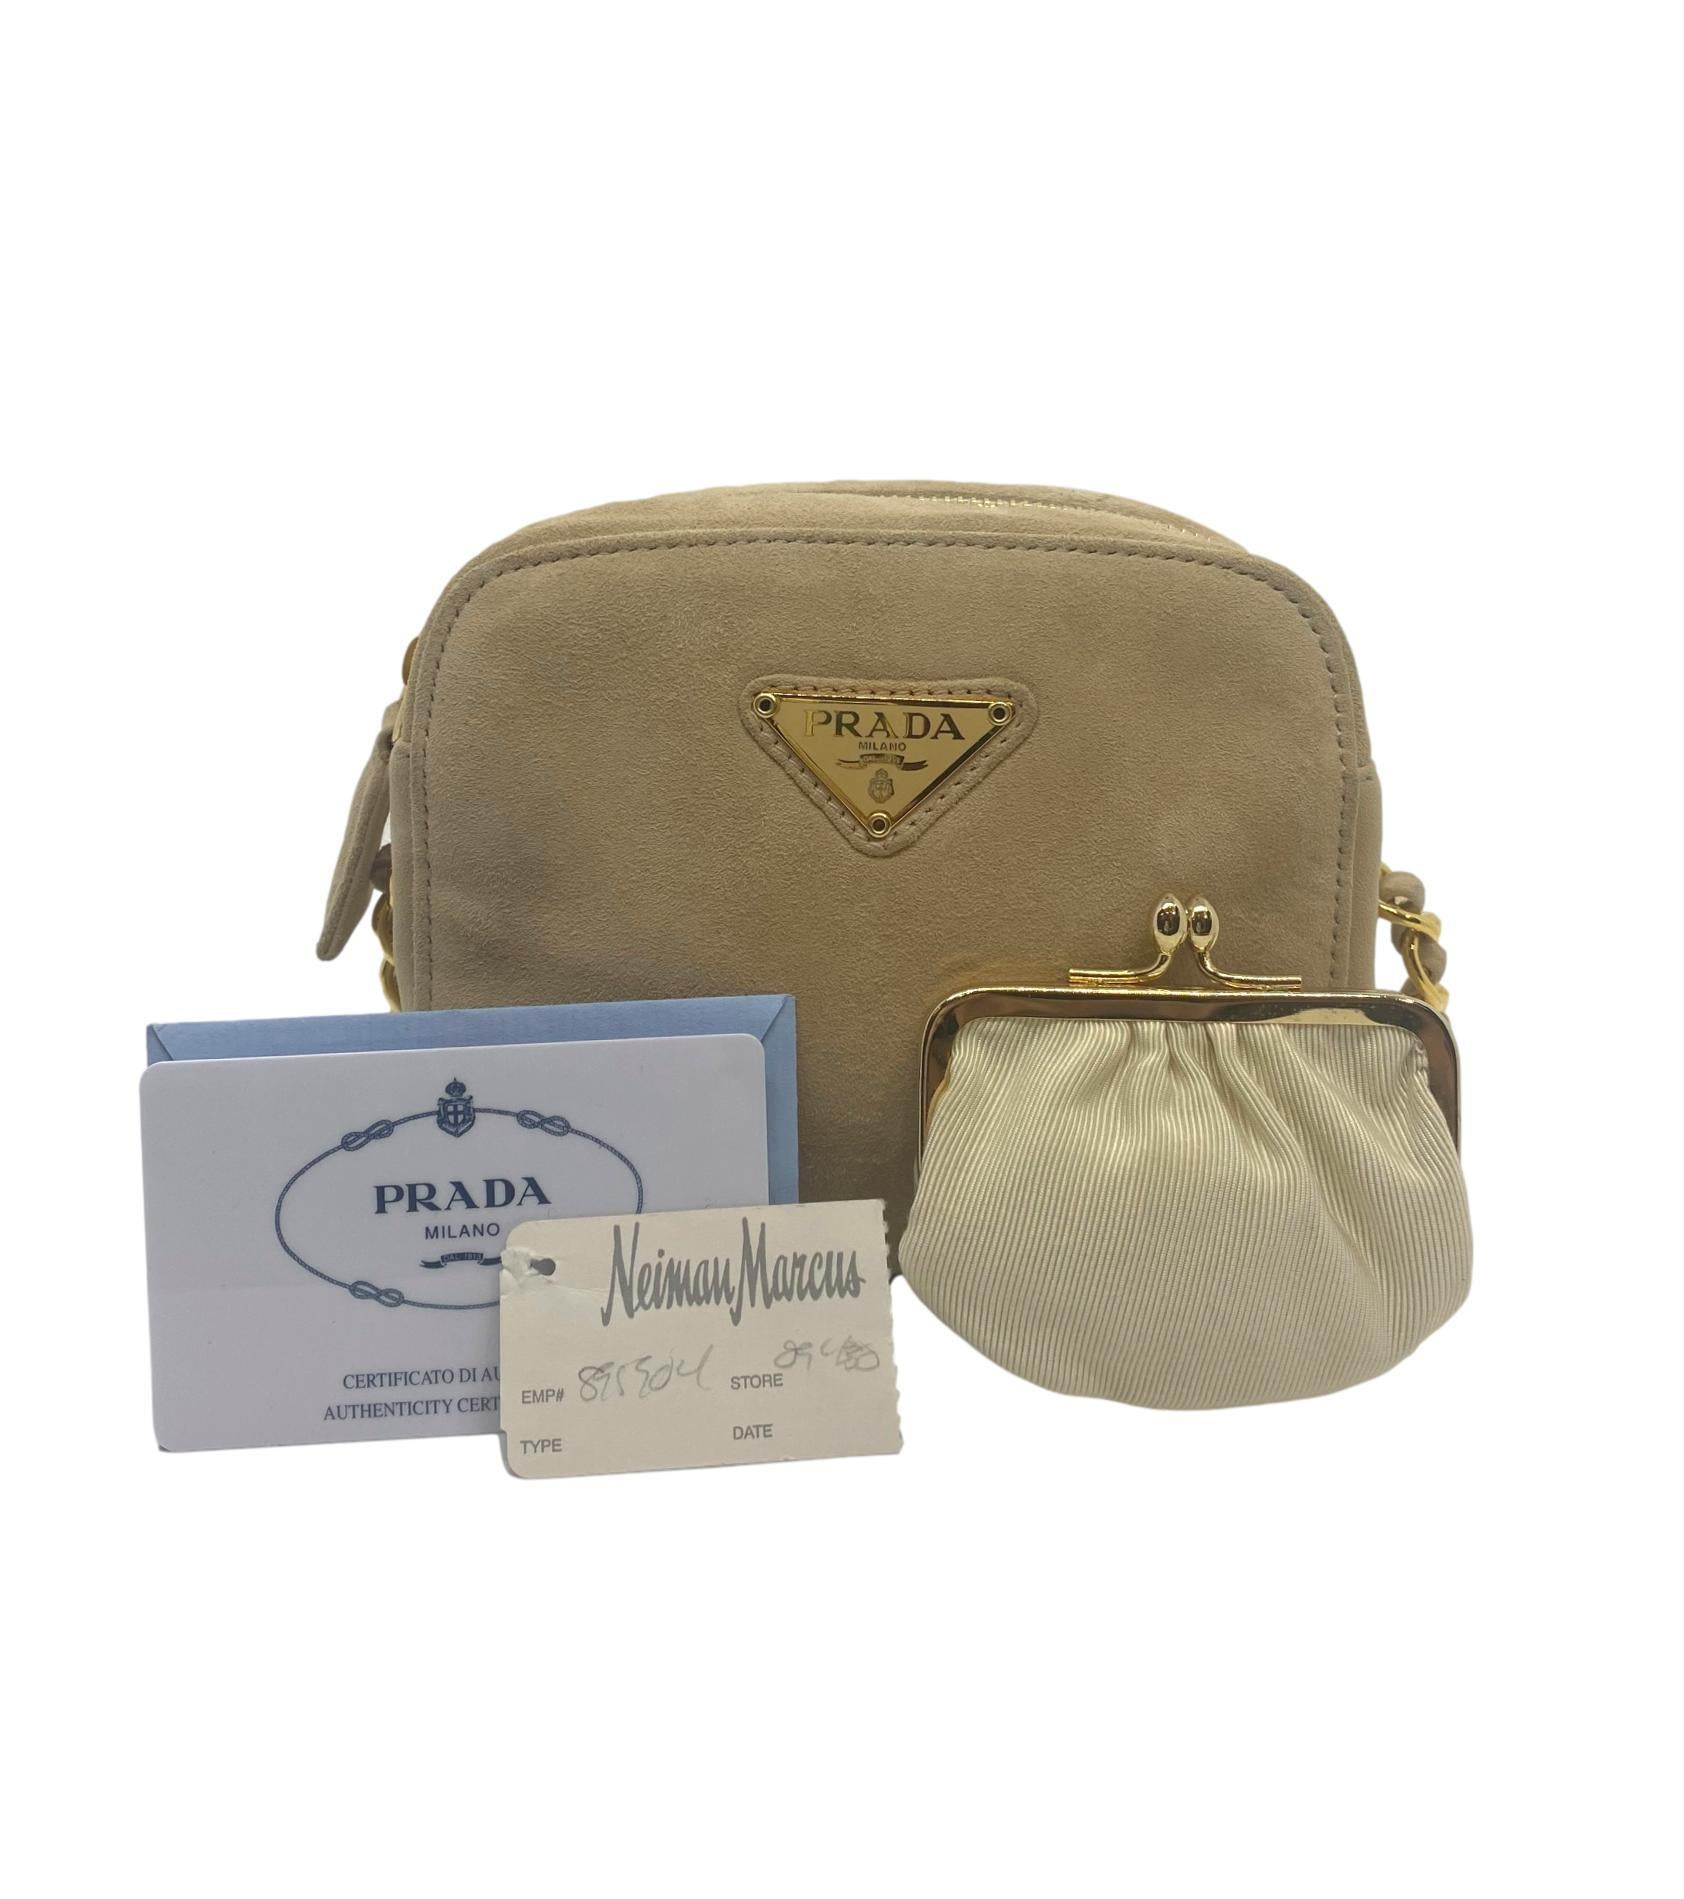 Prada Sand Suede Leather Vintage Mini Crossbody Bag, 2005. Founded by Mario Prada in 1913, Prada's flagship location opened in the Galleria Vittorio Emanuele II in Milan, the world's oldest shopping mall. By 1919, Prada officially became the